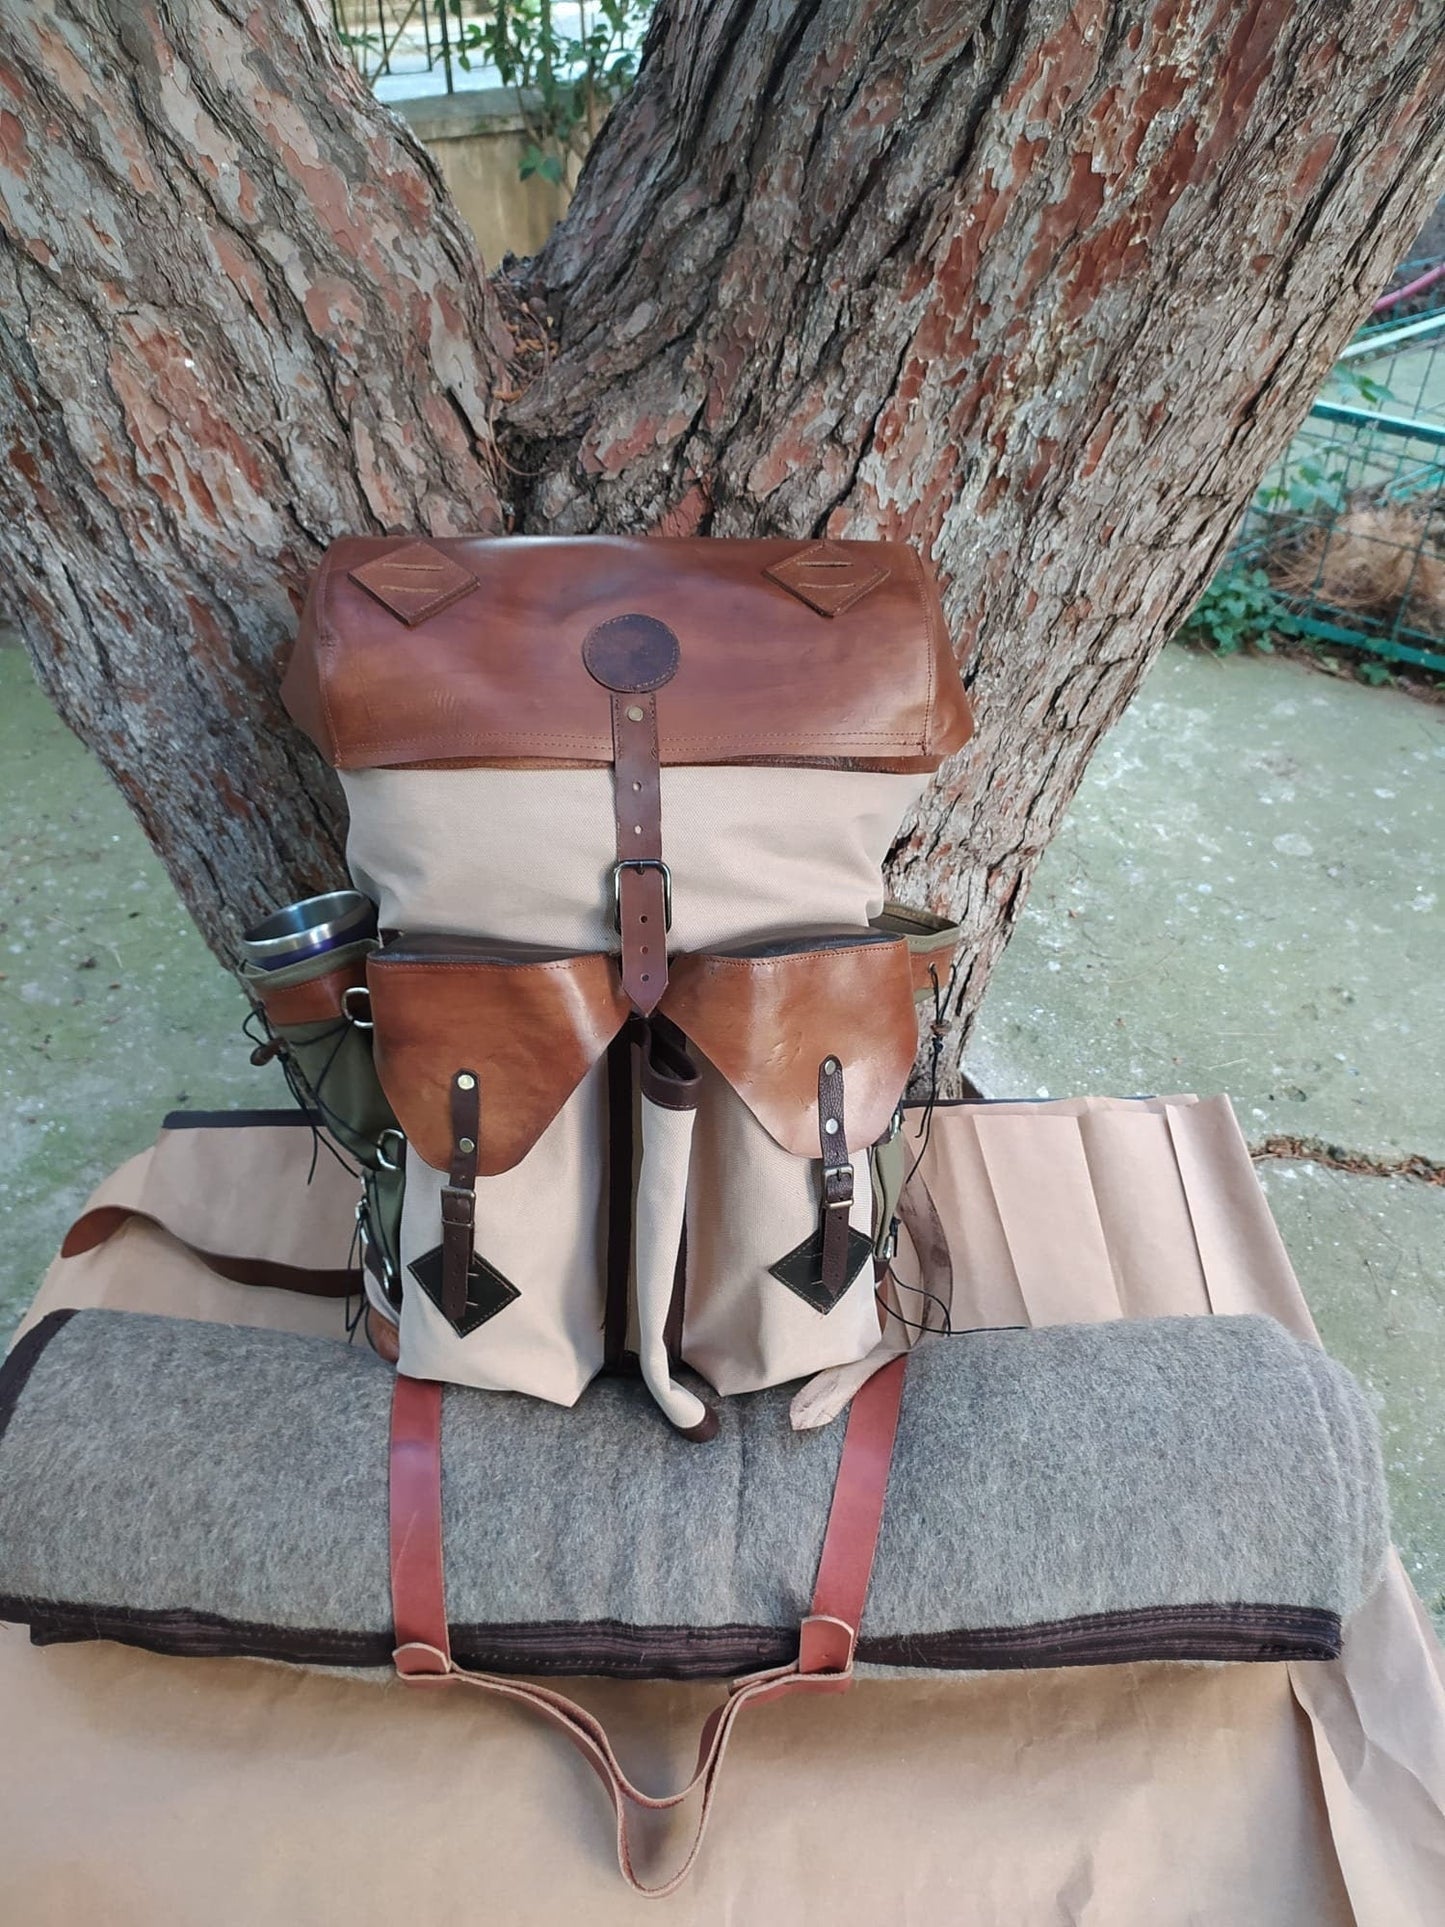 Camping Backpack | Camping Backpacks | Leather and Waxed Canvas | Camping Design Awards | Handmade Leather and Waxed Backpack for Travel, Camping, Hunting, Hiking | 45 Liter | Personalization bushcraft - camping - hiking backpack 99percenthandmade   